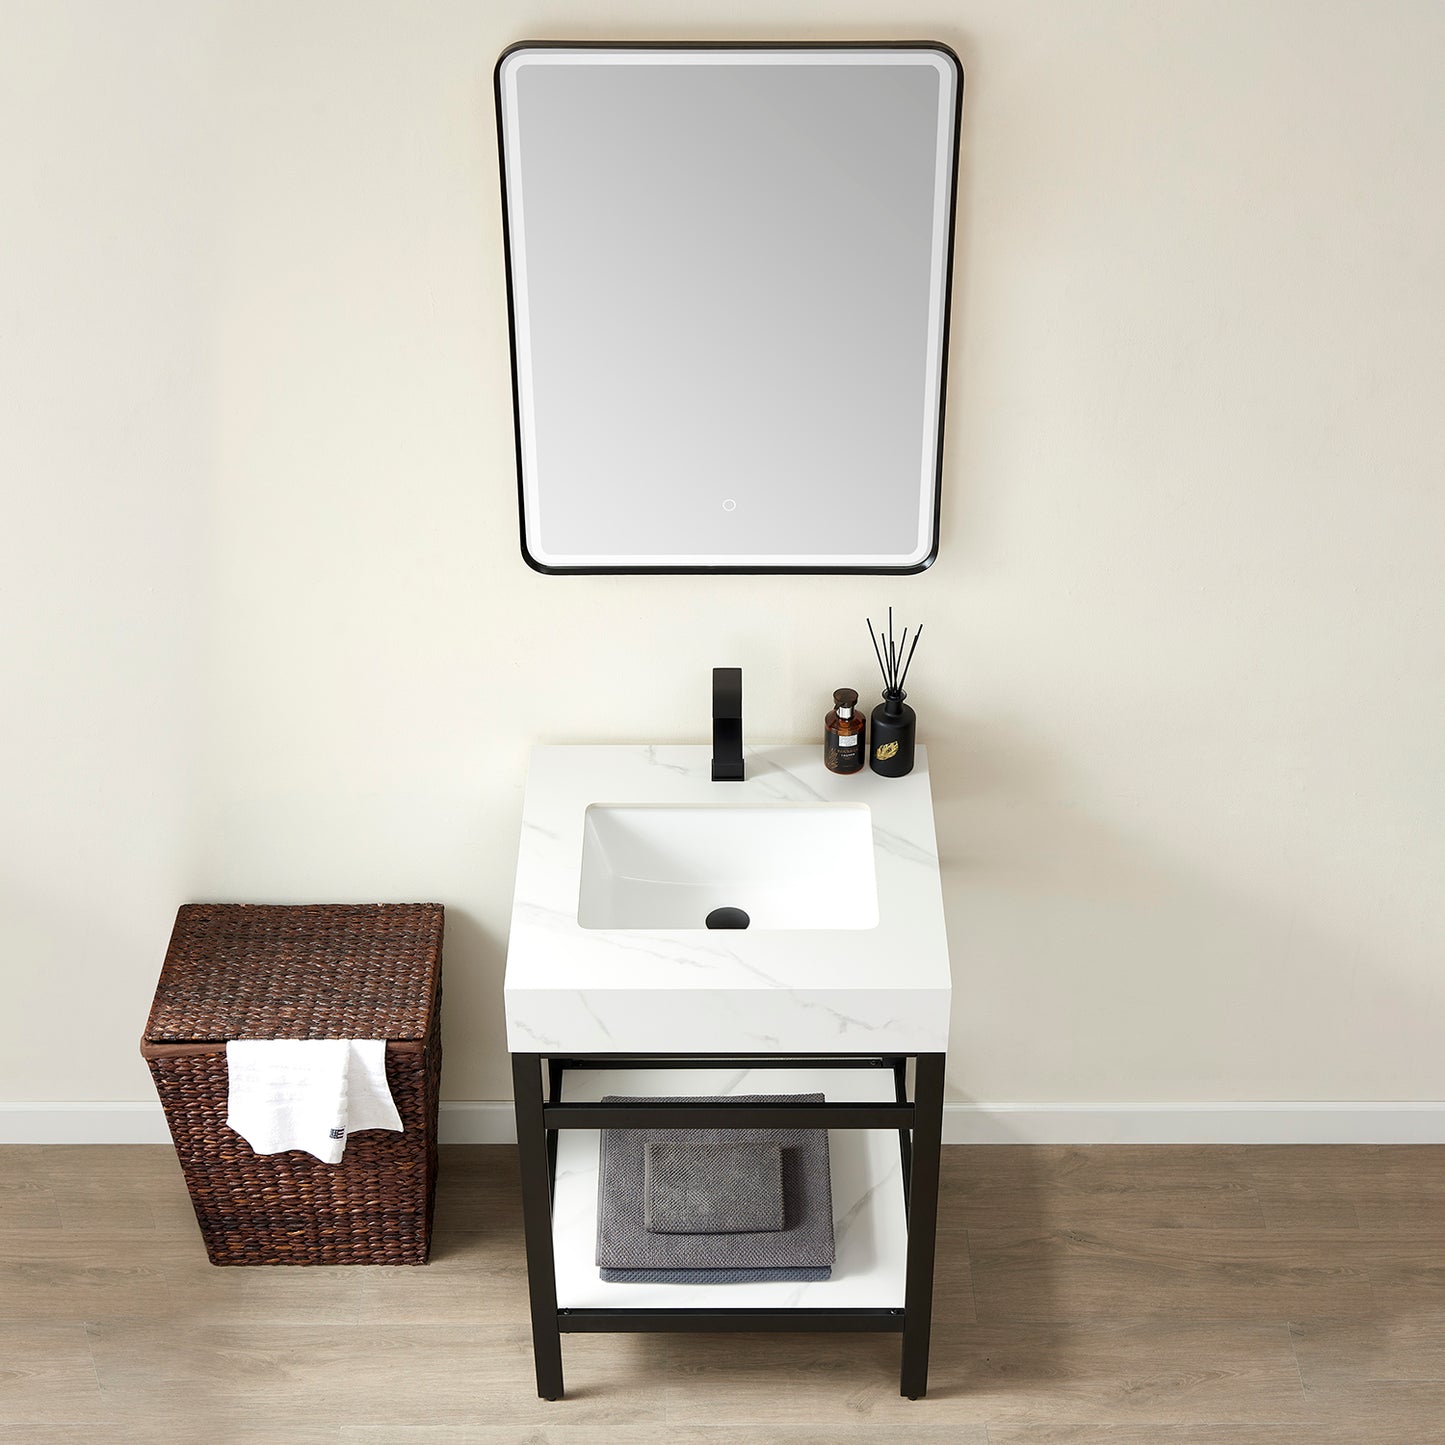 Funes 24" Single Sink Bath Vanity in Matt Black Metal Support with White Sintered Stone Top and Mirror